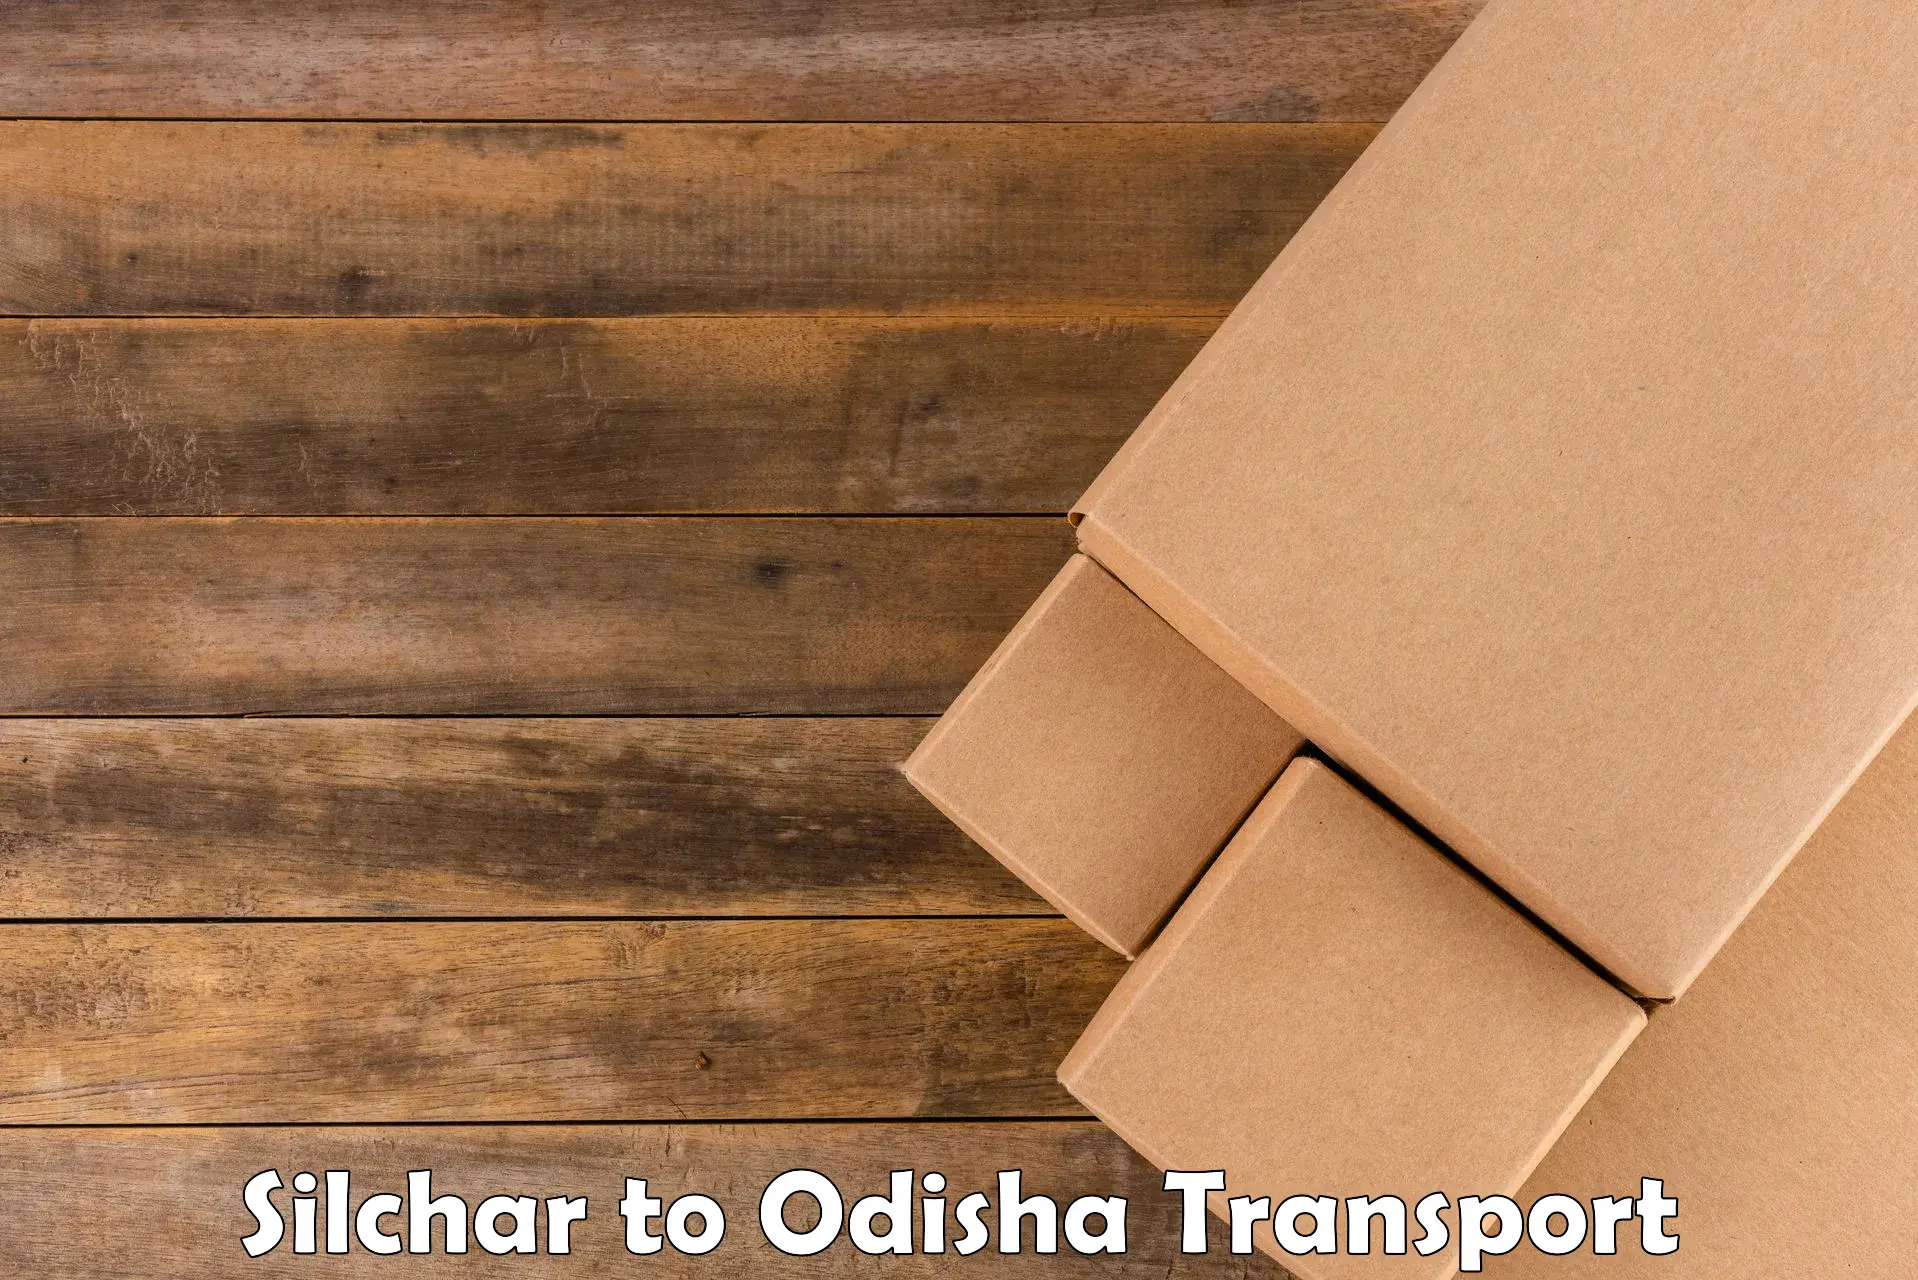 Goods delivery service Silchar to Paradip Port